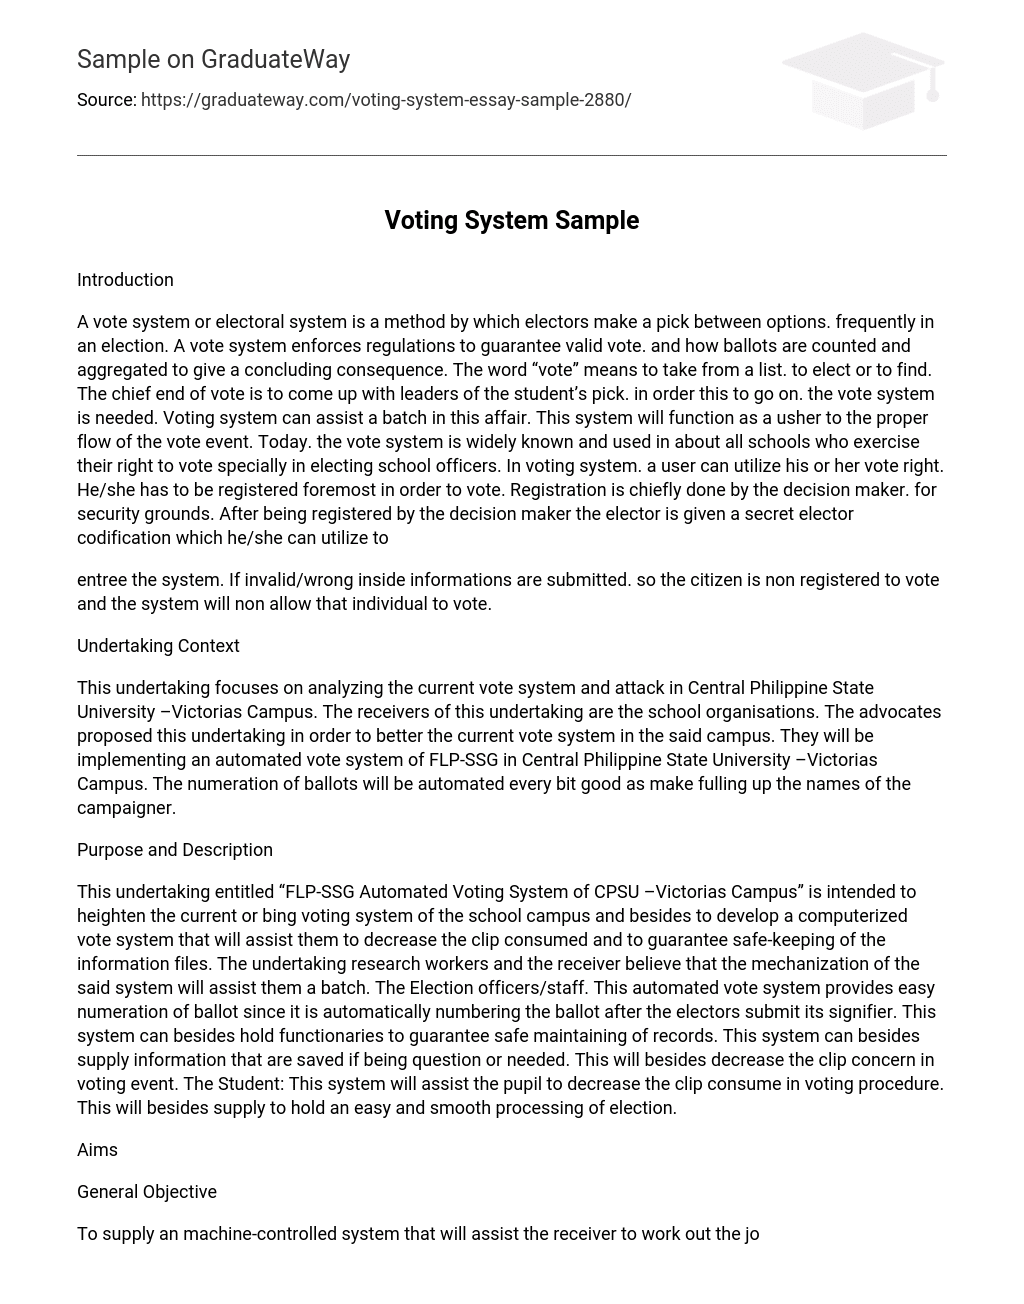 A Vote System or Electoral System